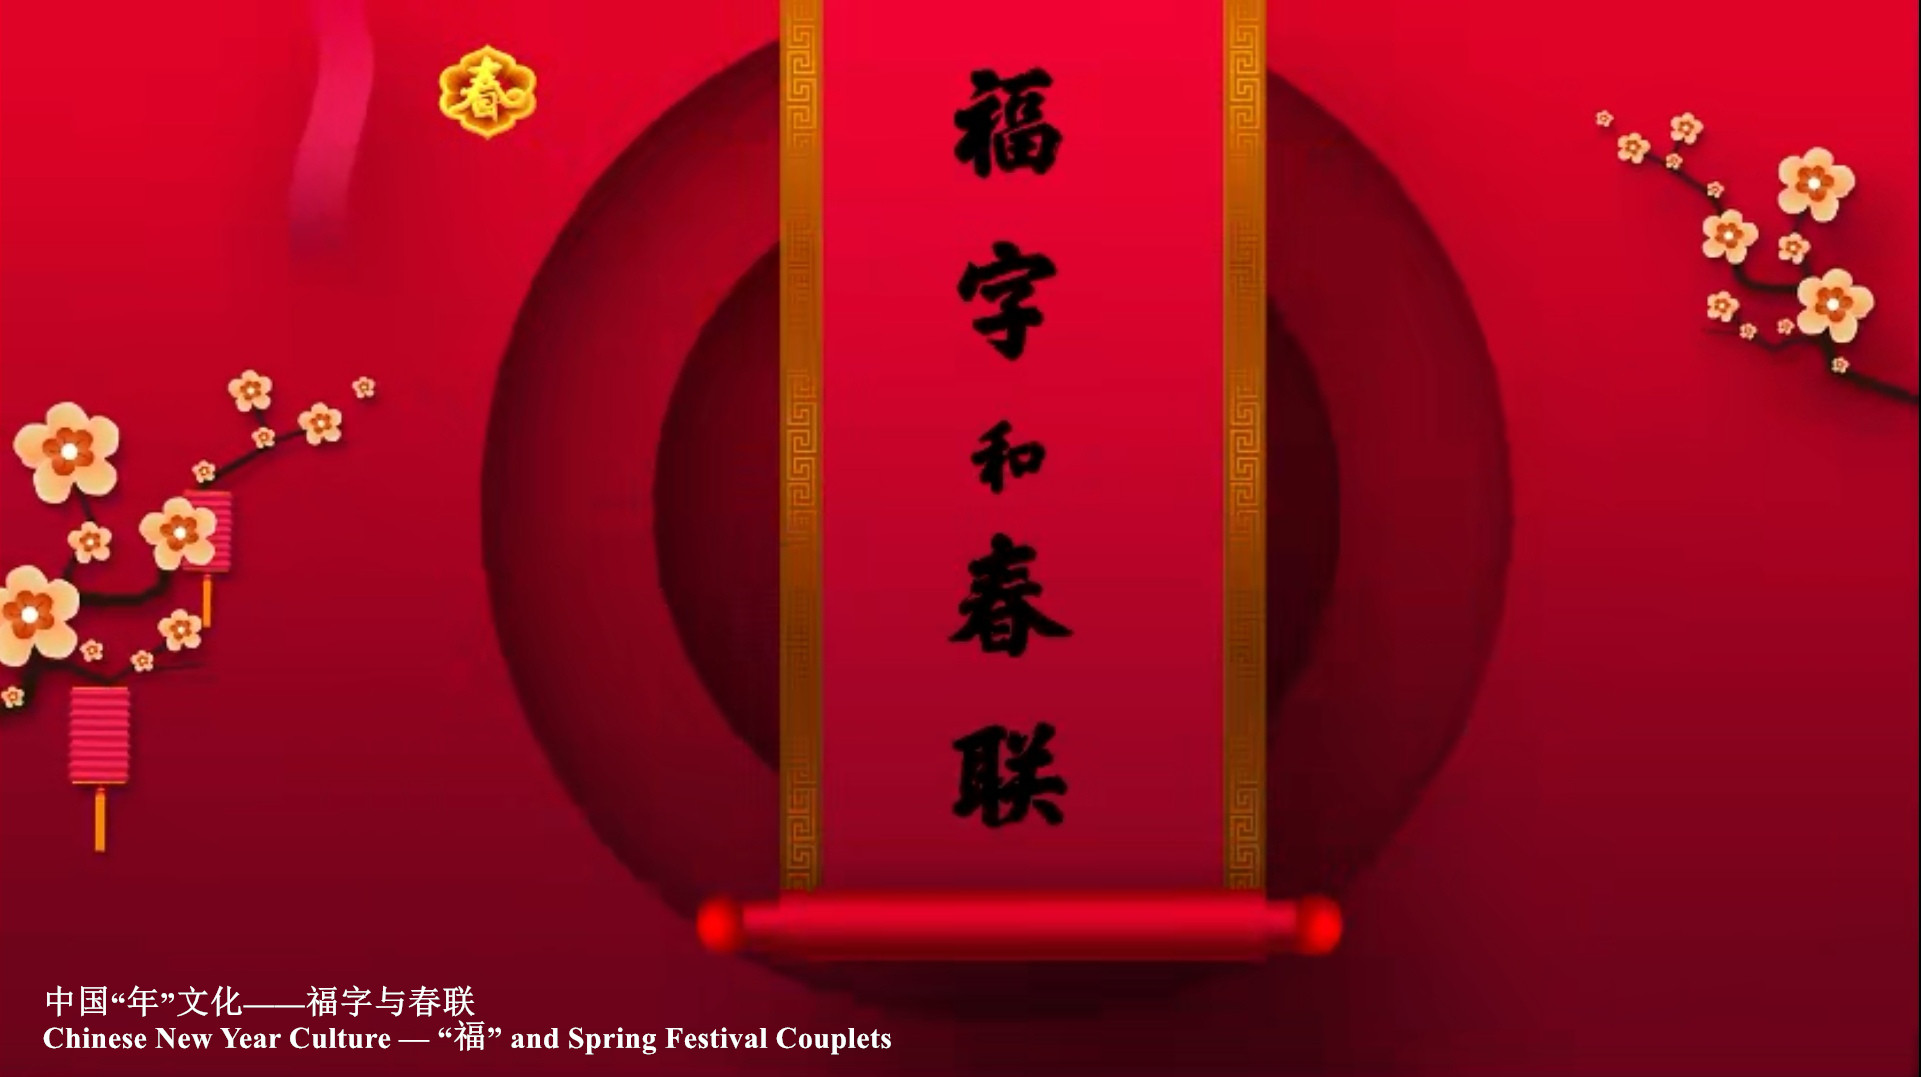 Chinese New Year Culture — “福” and Spring Festival Couplets